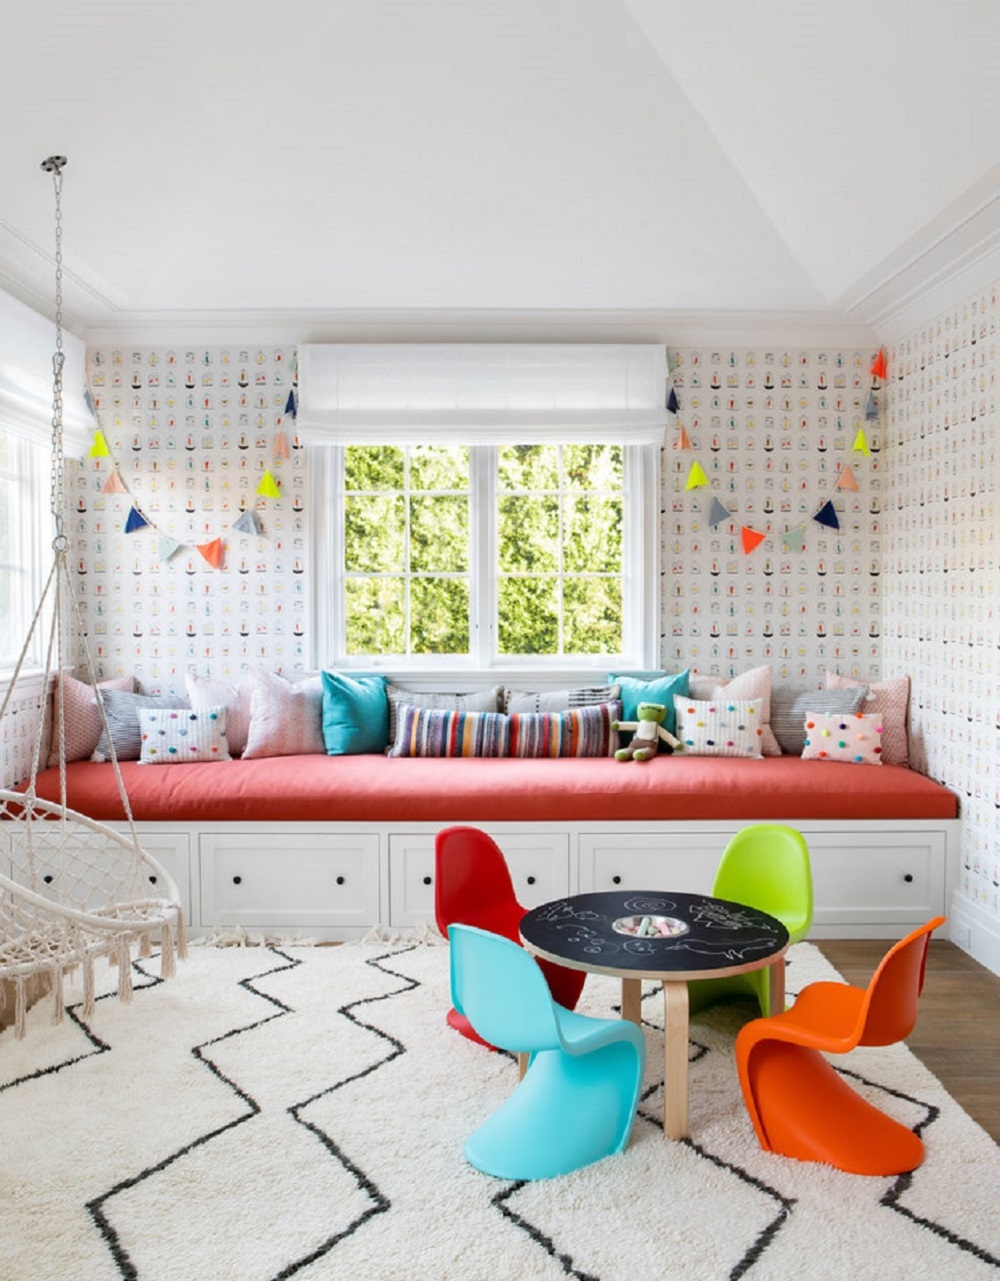 42.LosAngelesPacificPalisadesbyChangoCo.-Playroom Kids playroom ideas to arrange and decorate the coolest kids space